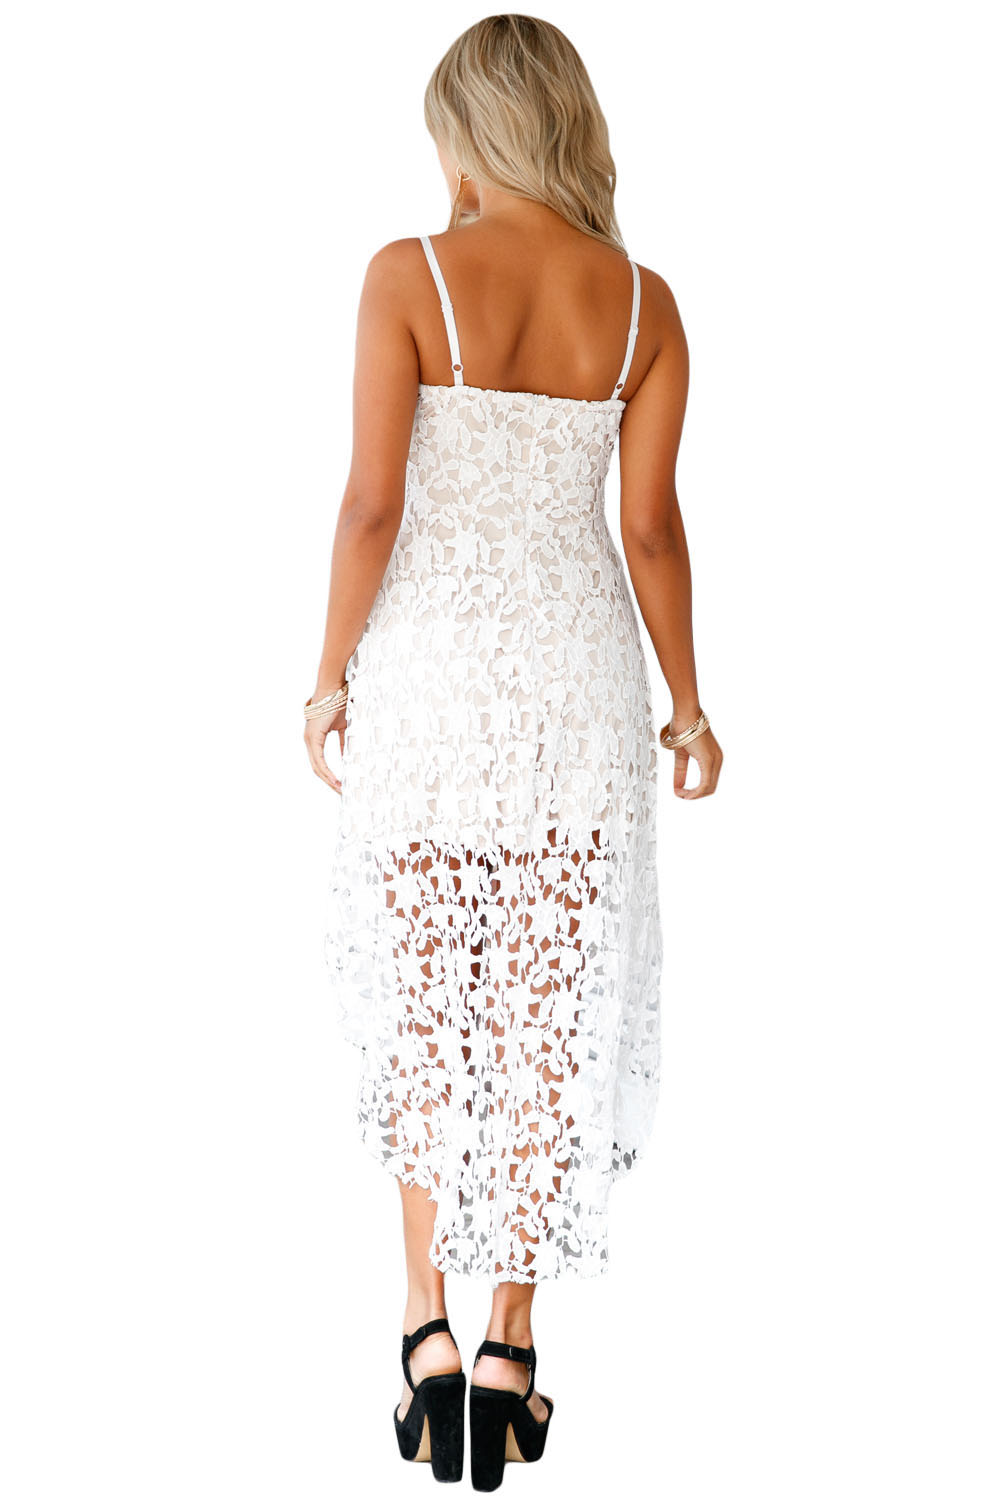 BY61443-1 White Hollow Lace Nude Illusion Hi-low Party Dress